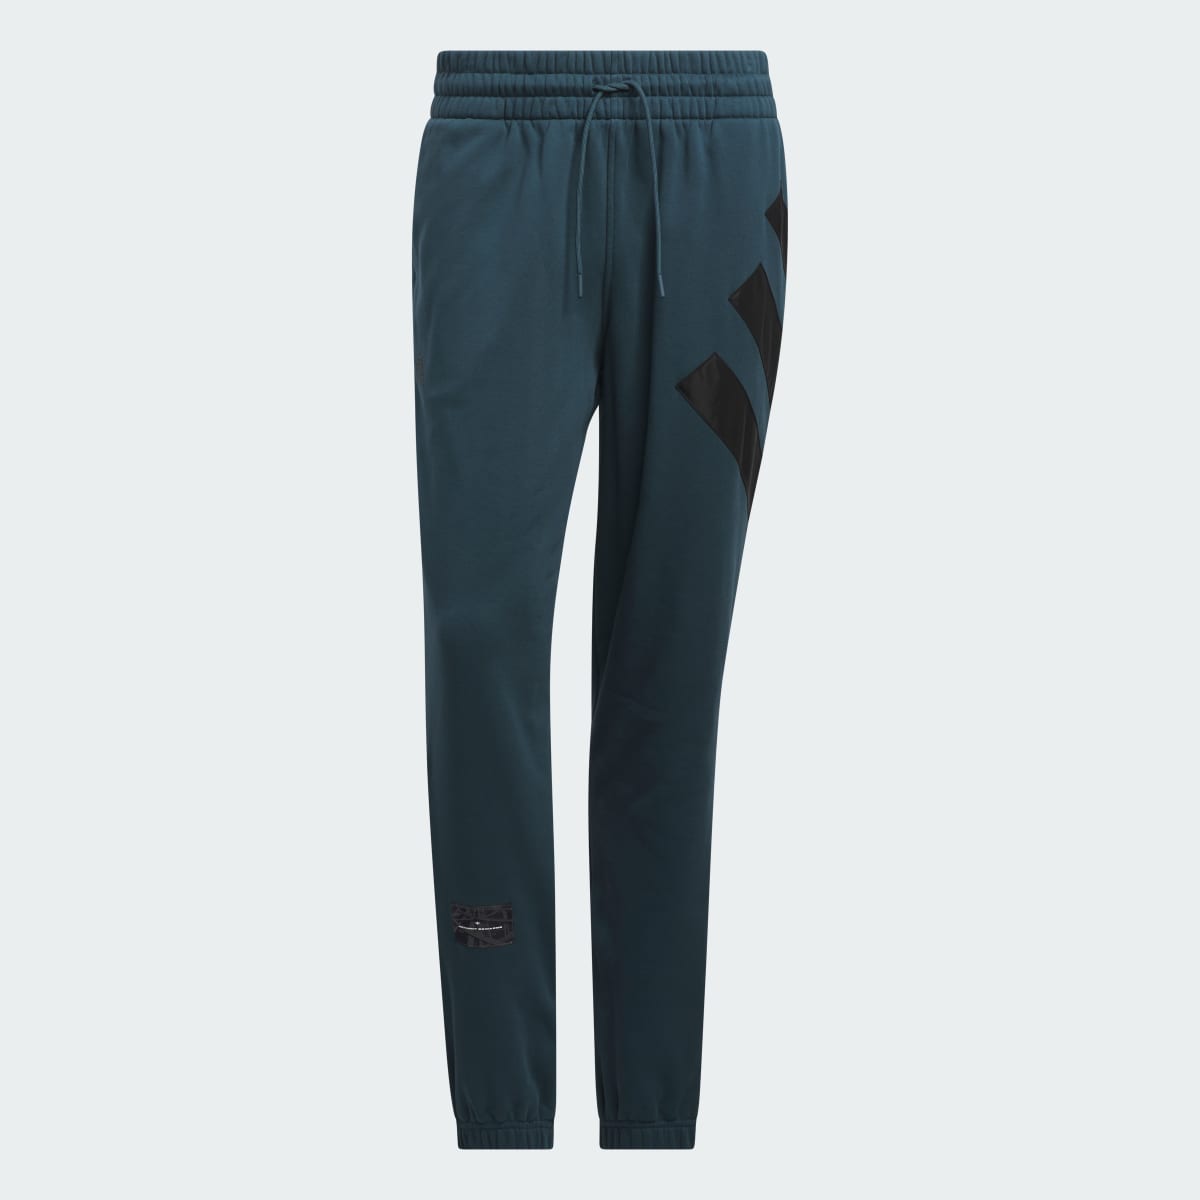 Adidas AE LS Tracksuit Bottoms. 4